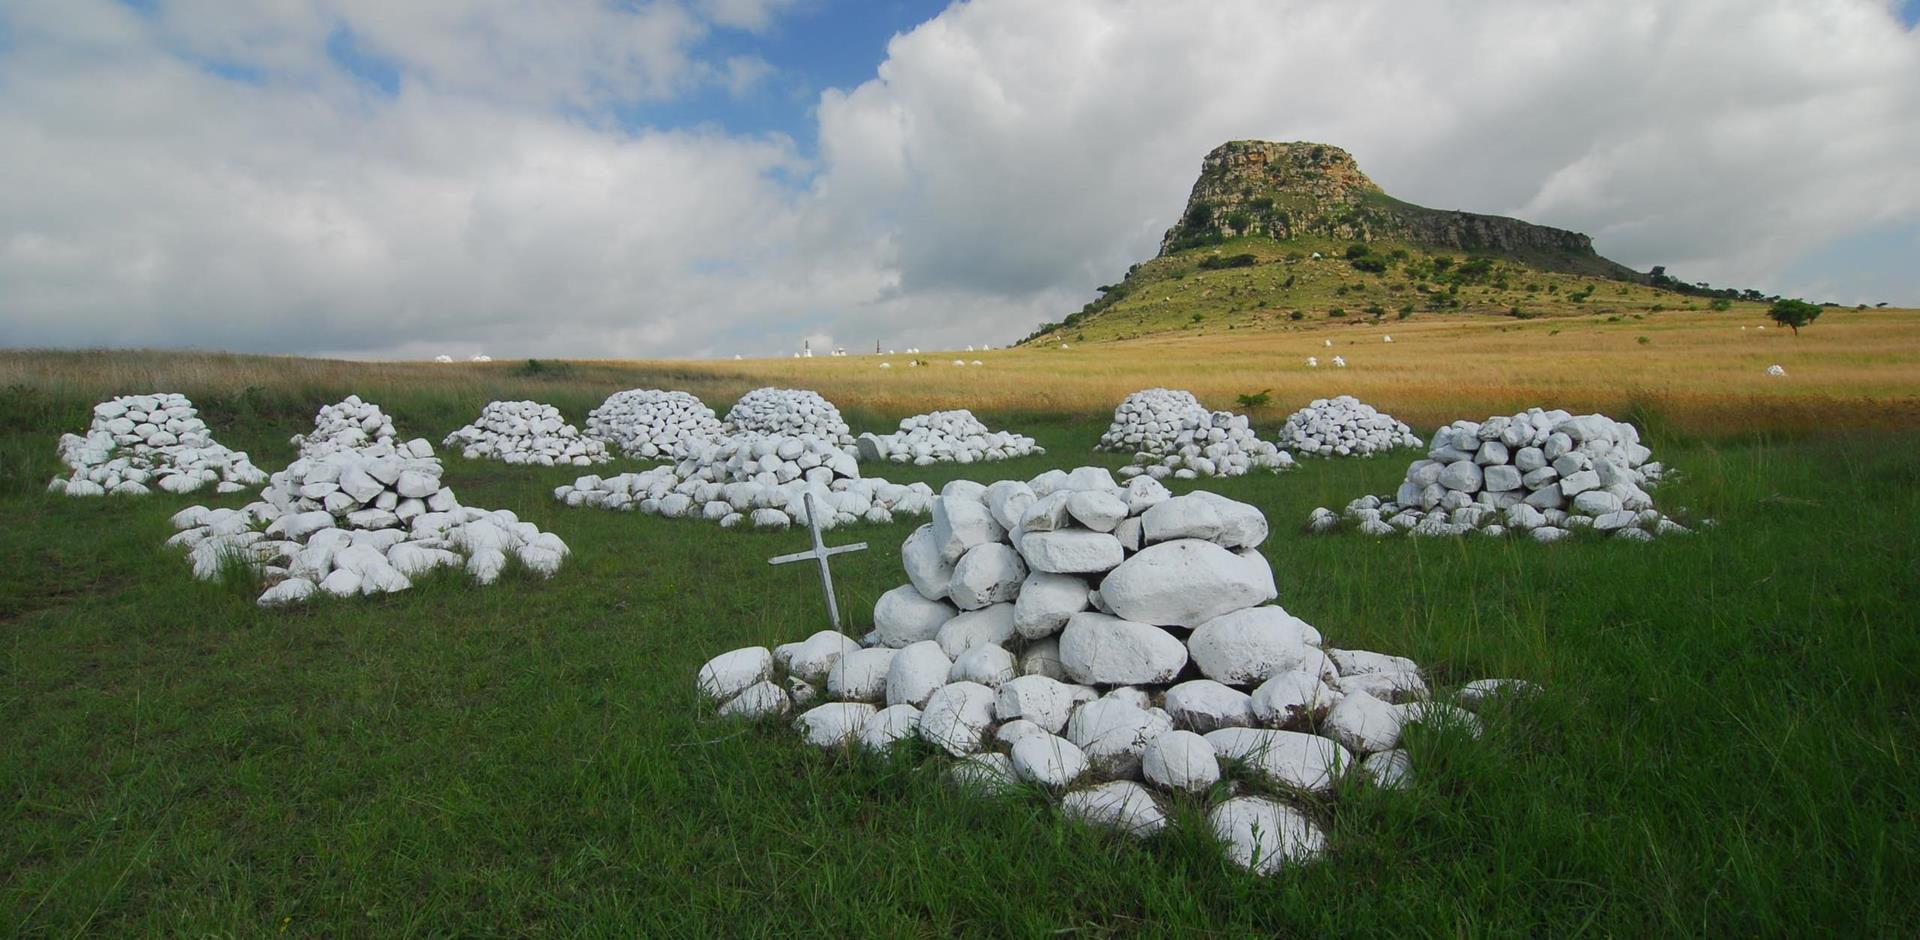 A&K itinerary: South Africa’s battlefields